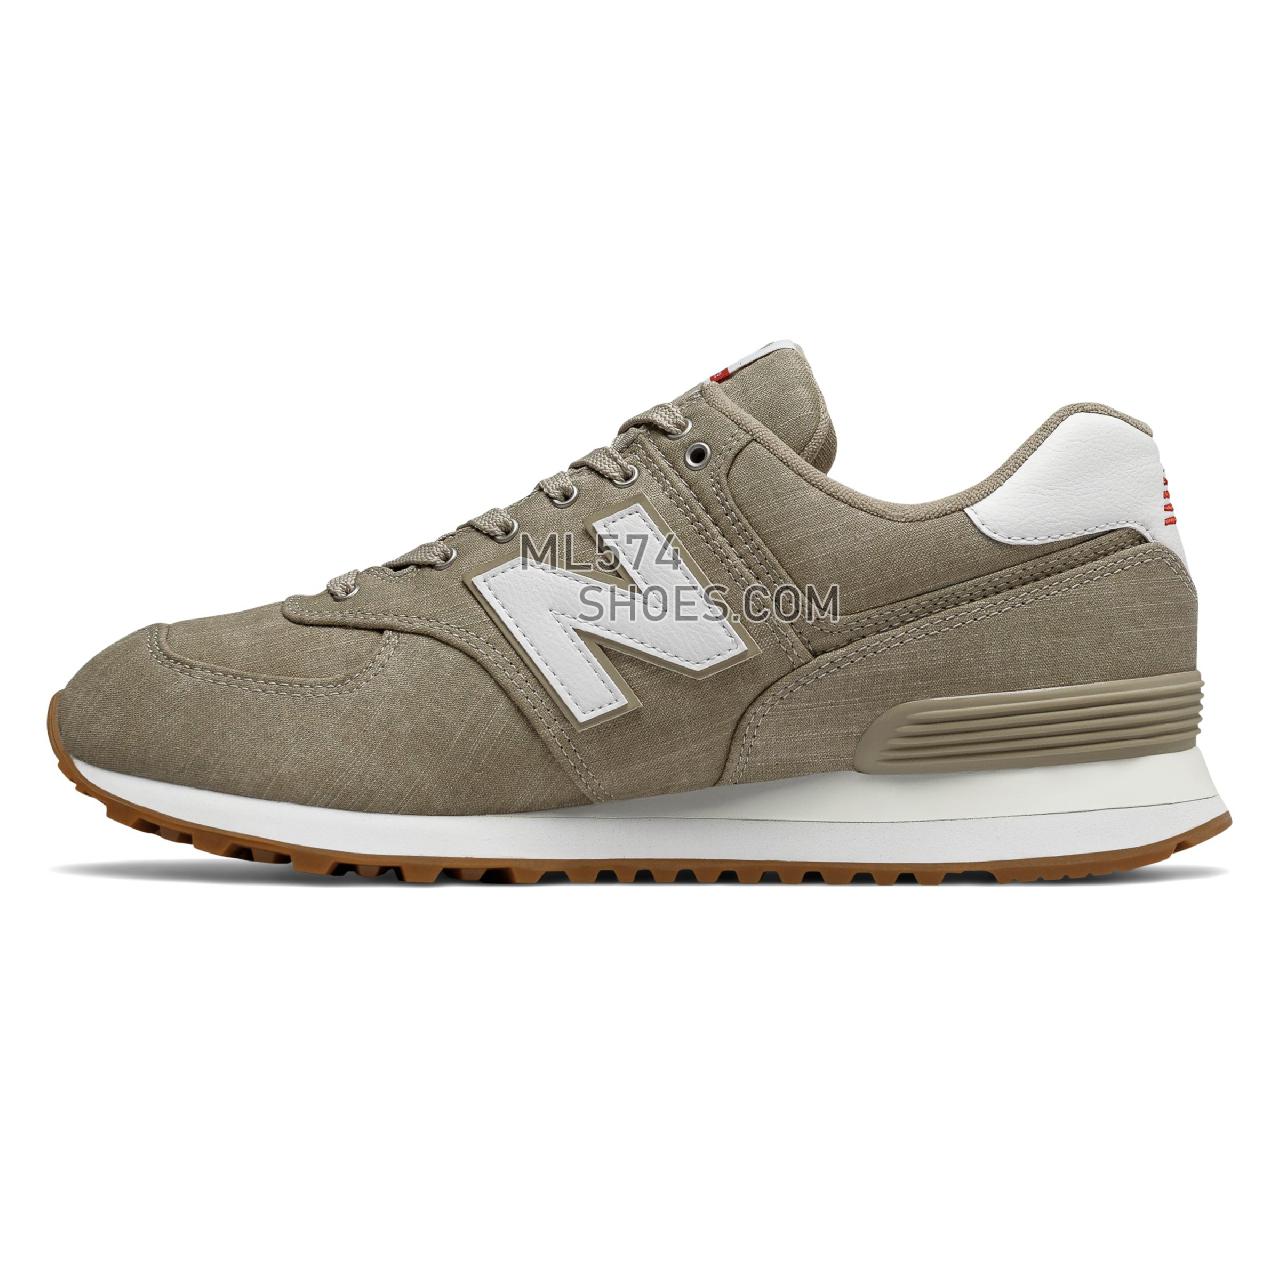 New Balance 574 Beach Chambray - Men's 574 - Classic Beige with White - ML574YLG